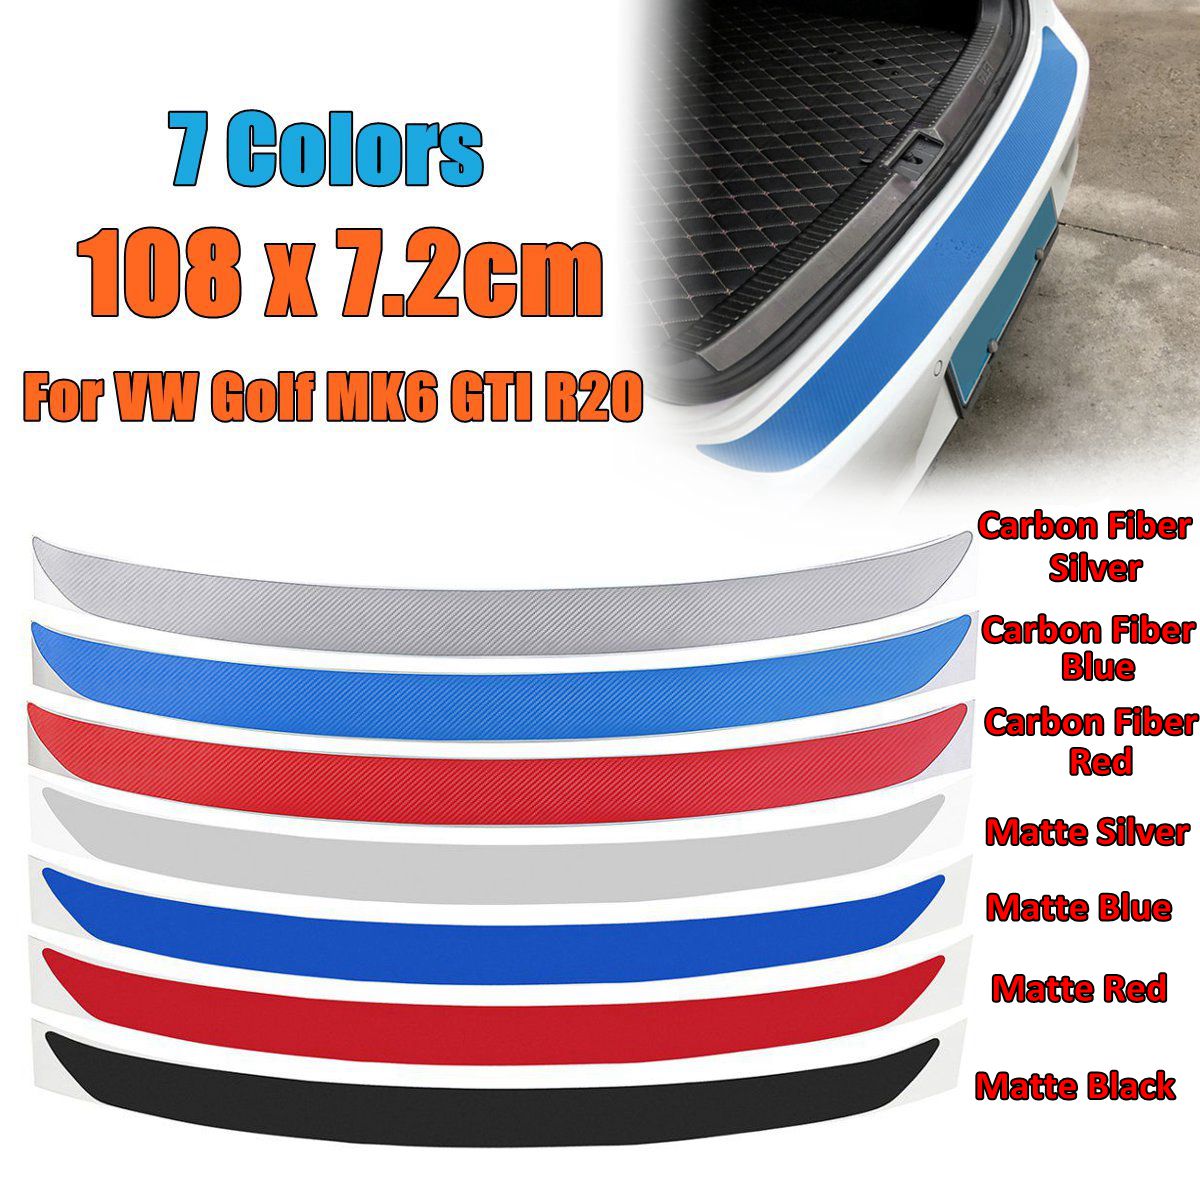 108x7.2cm 1Pc Carbon Fiber Rear Bumper Protector Sticker Trim 7 Colors For VW Golf MK6 GTI R20 Car-Styling Sticker And Decals